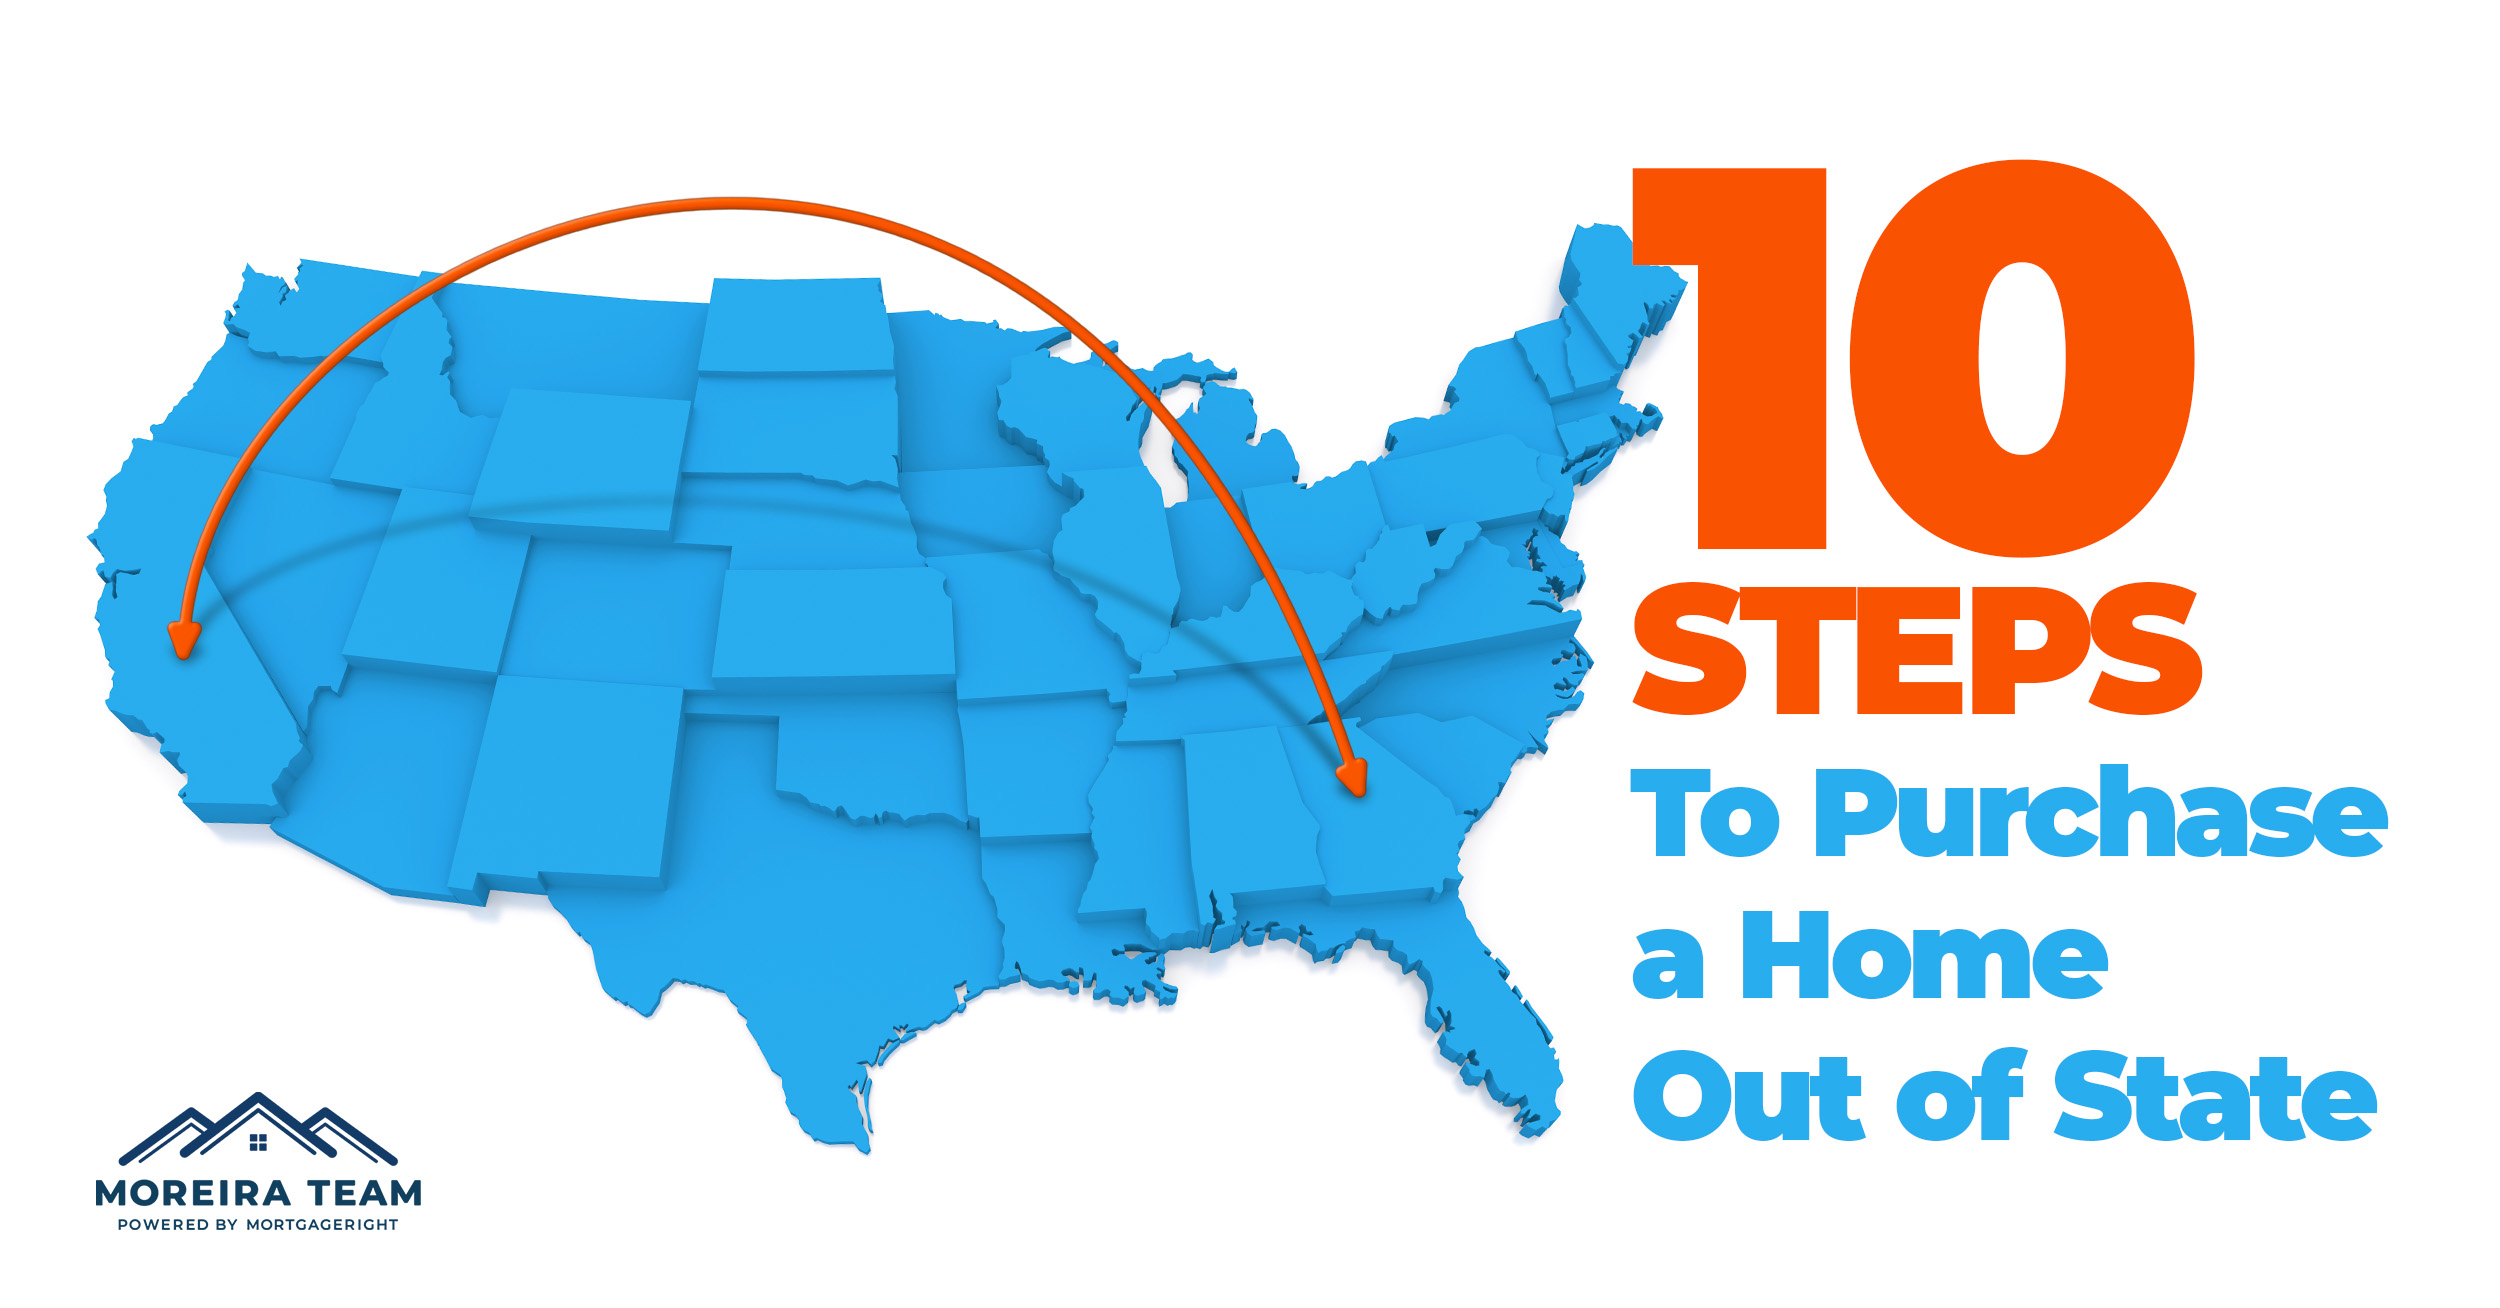 How to Purchase a Home Out of State in 10 Steps